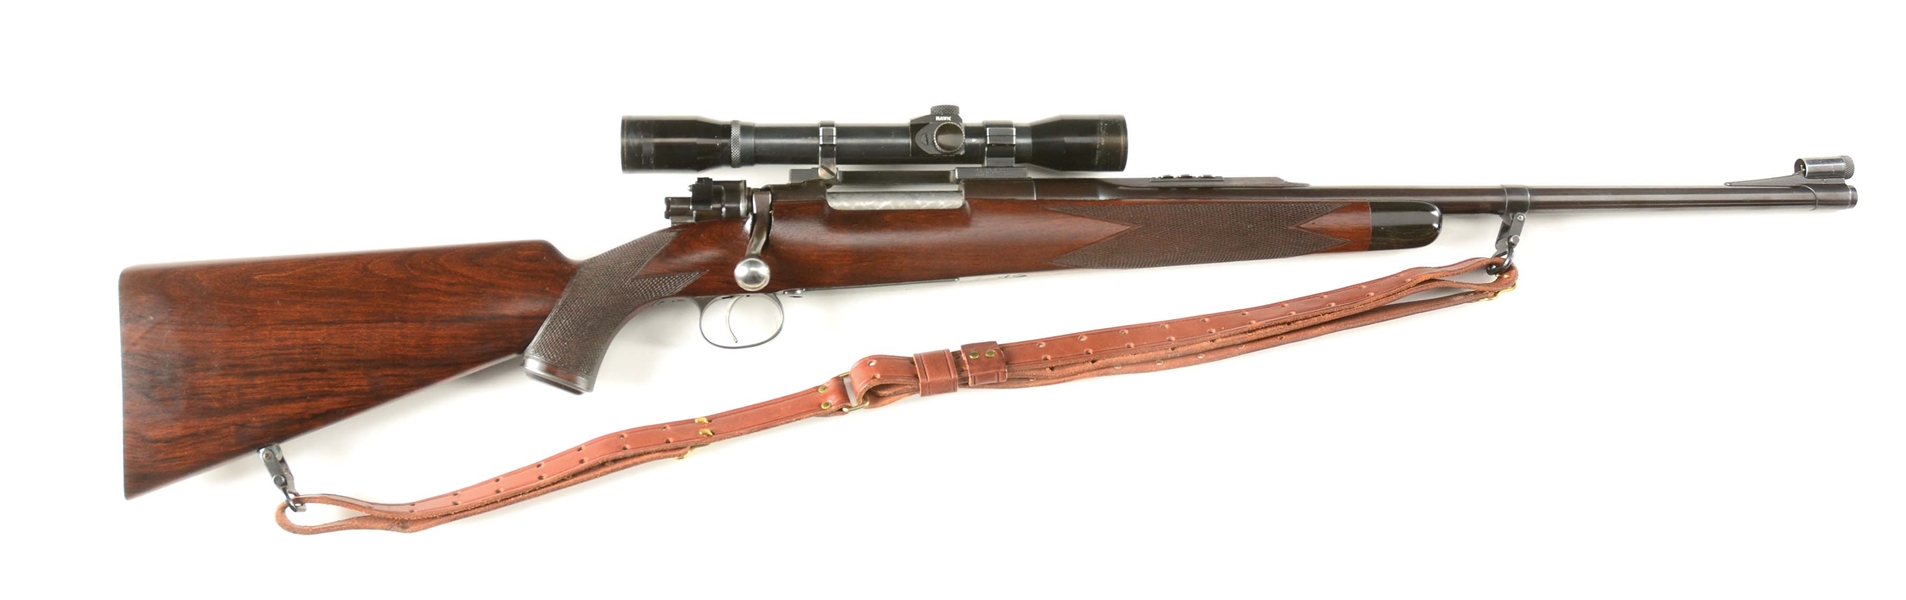 (C) JOHN DUBIEL CUSTOM SMALL RING 98 MAUSER BOLT ACTION RIFLE WITH SCOPE. 